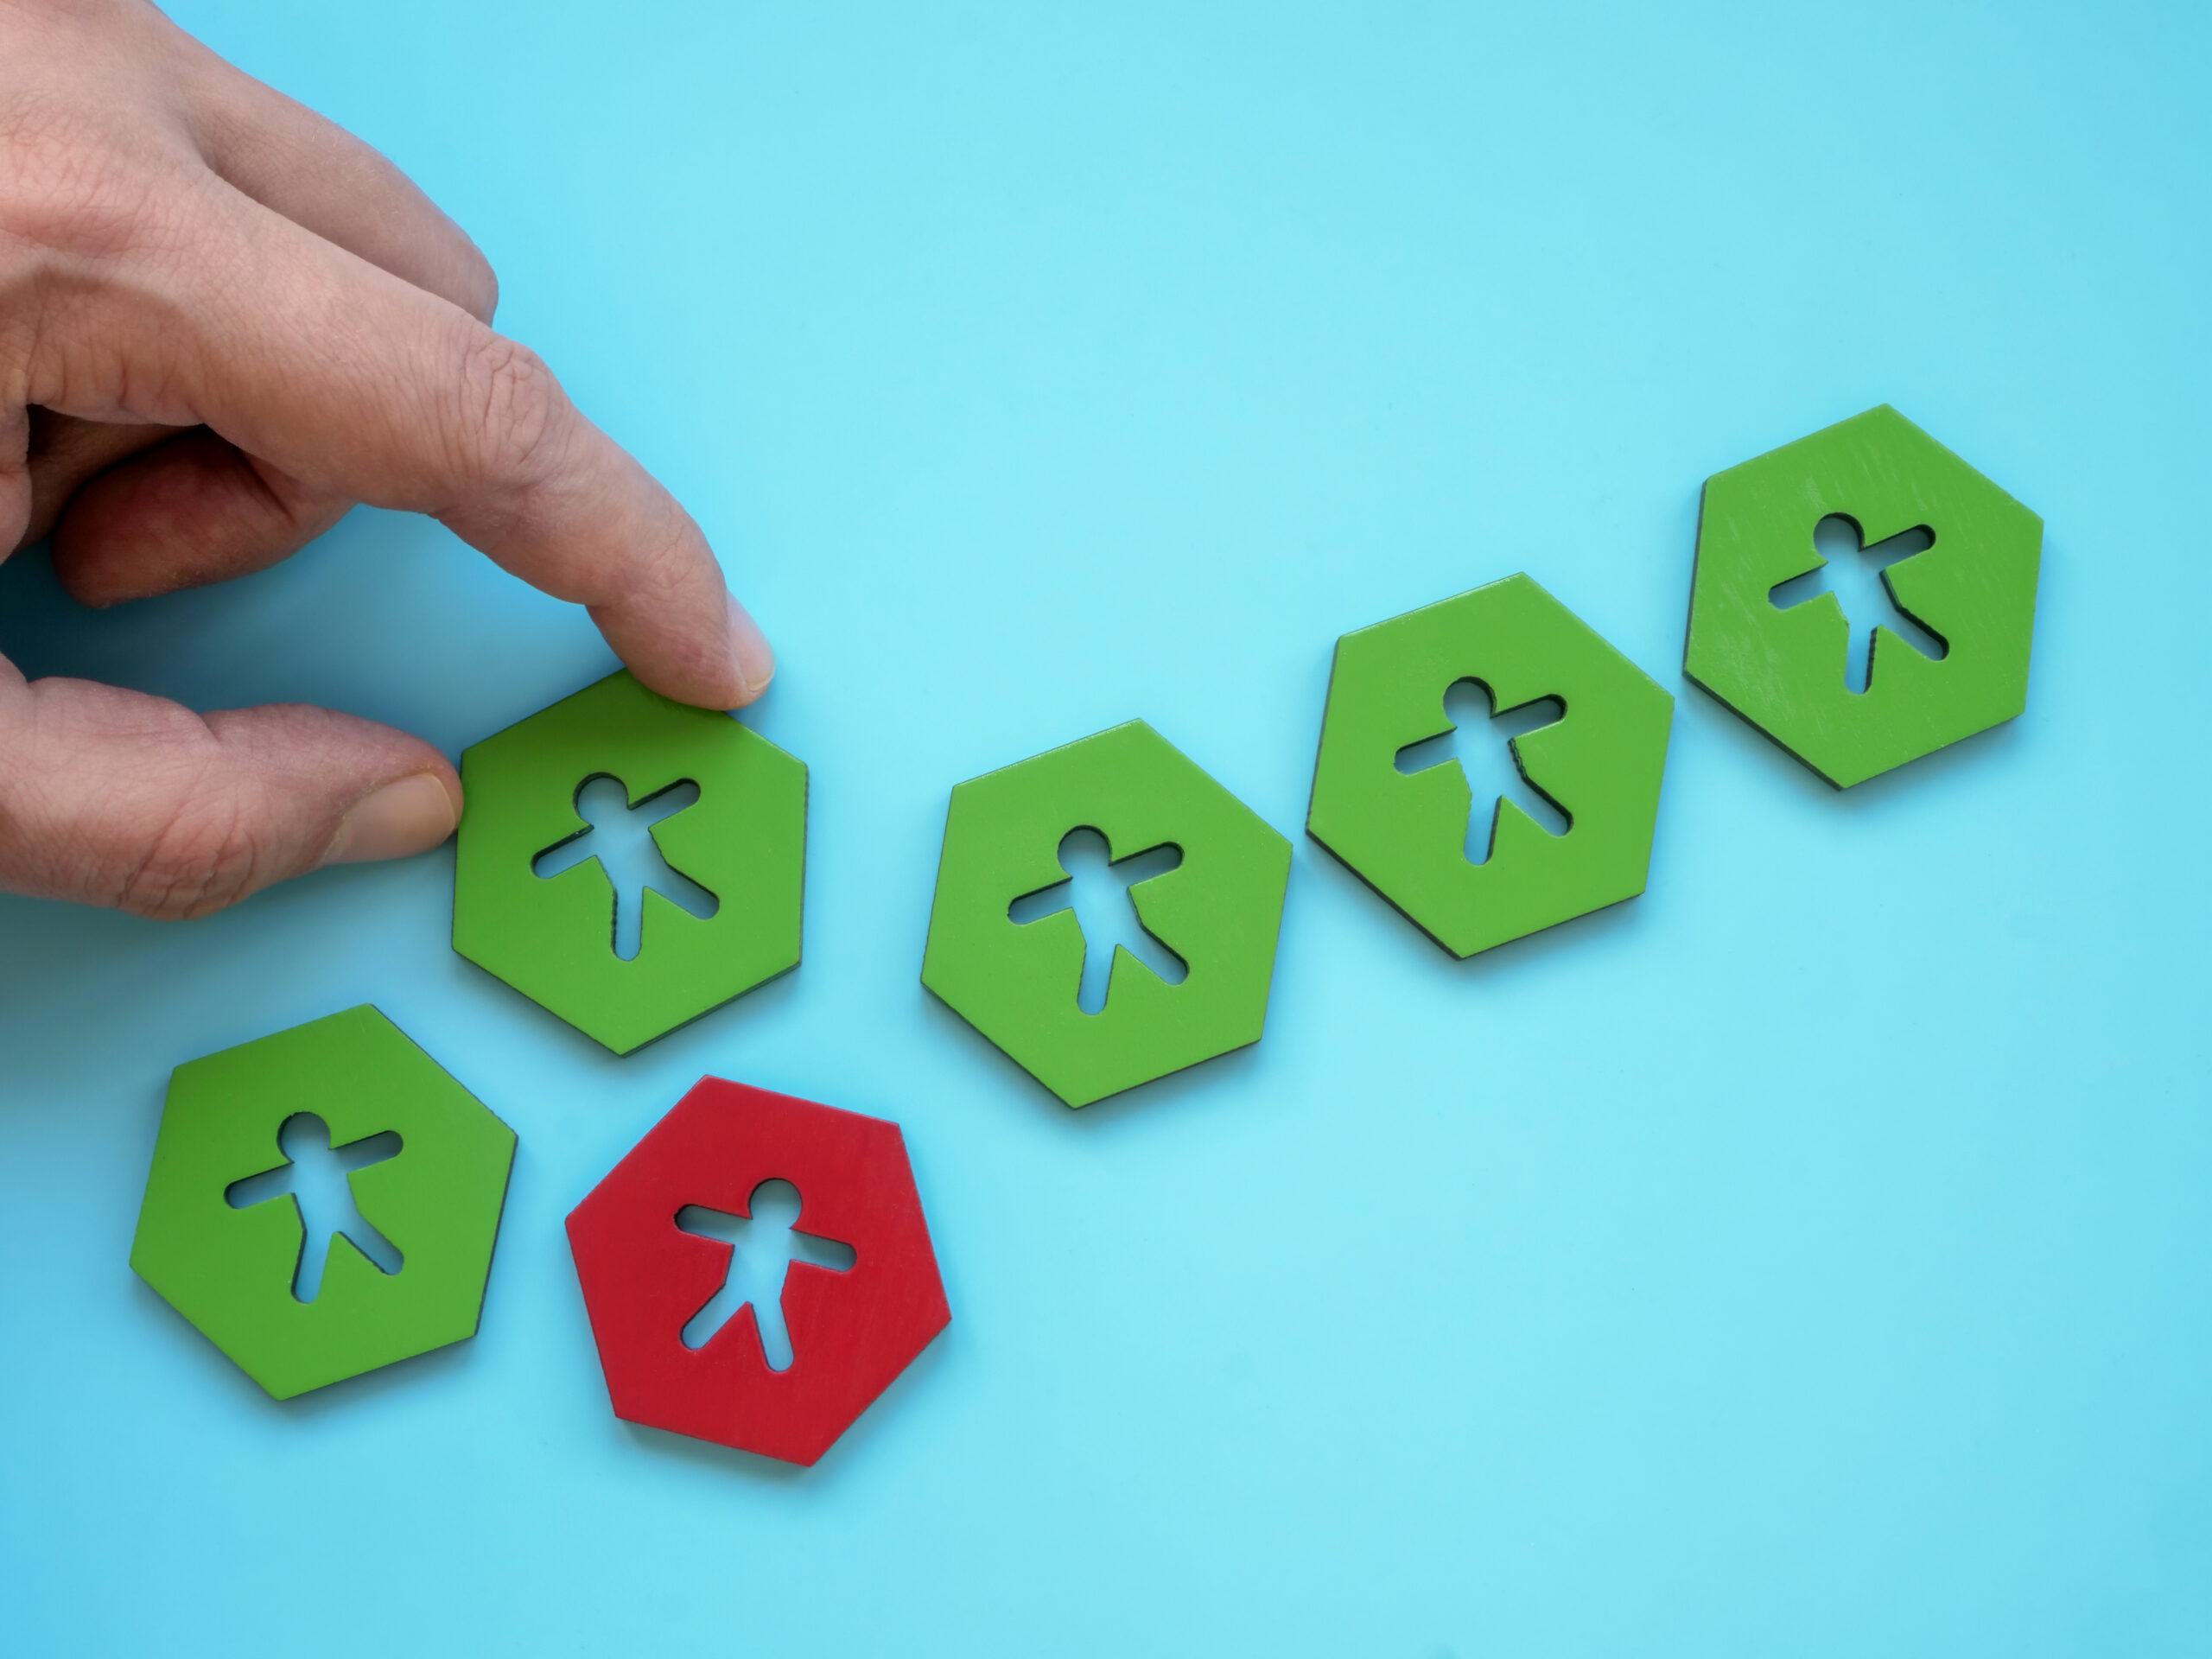 Image of hand choosing green token, representing the right person, in place of red. [Three Steps to Make Sure You Stop Hiring the Wrong Person]